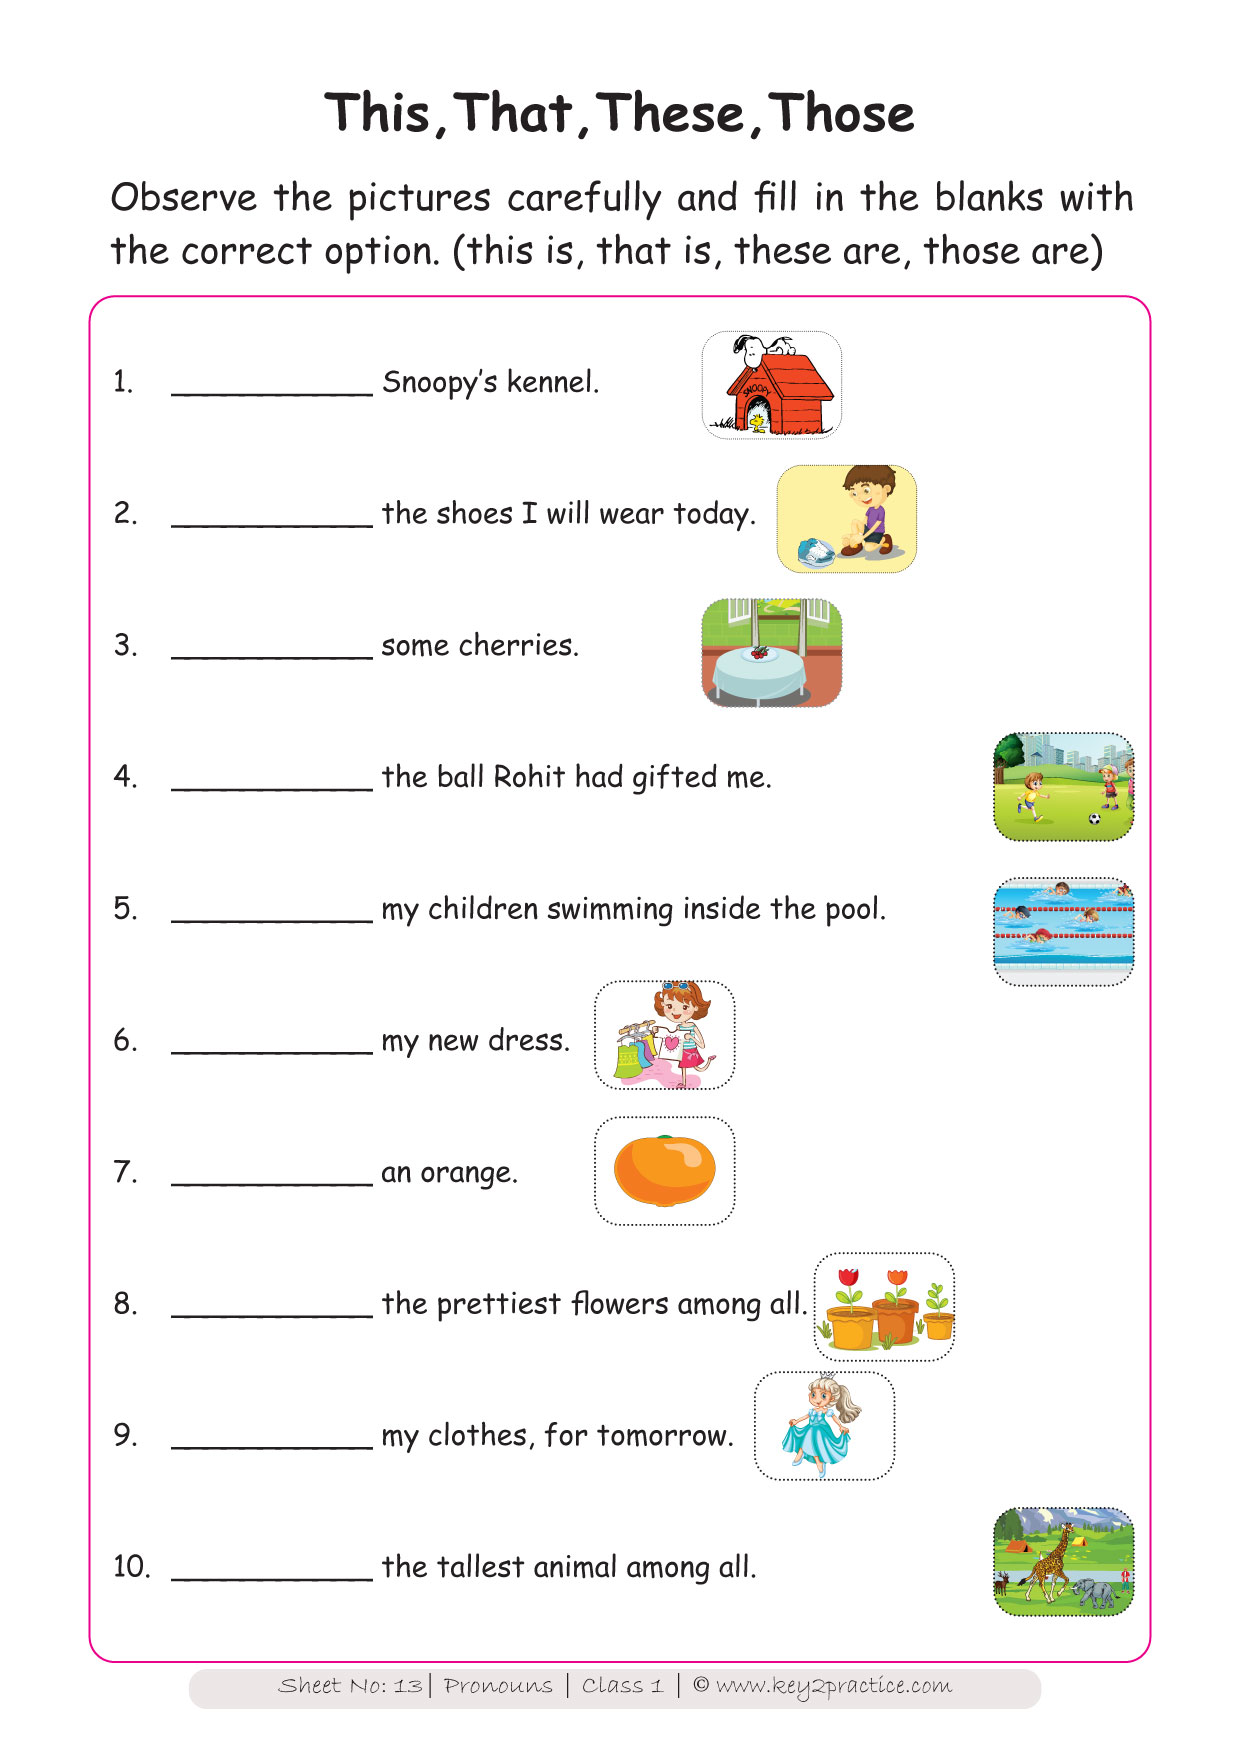 30-nouns-worksheet-for-grade-1-image-rugby-rumilly